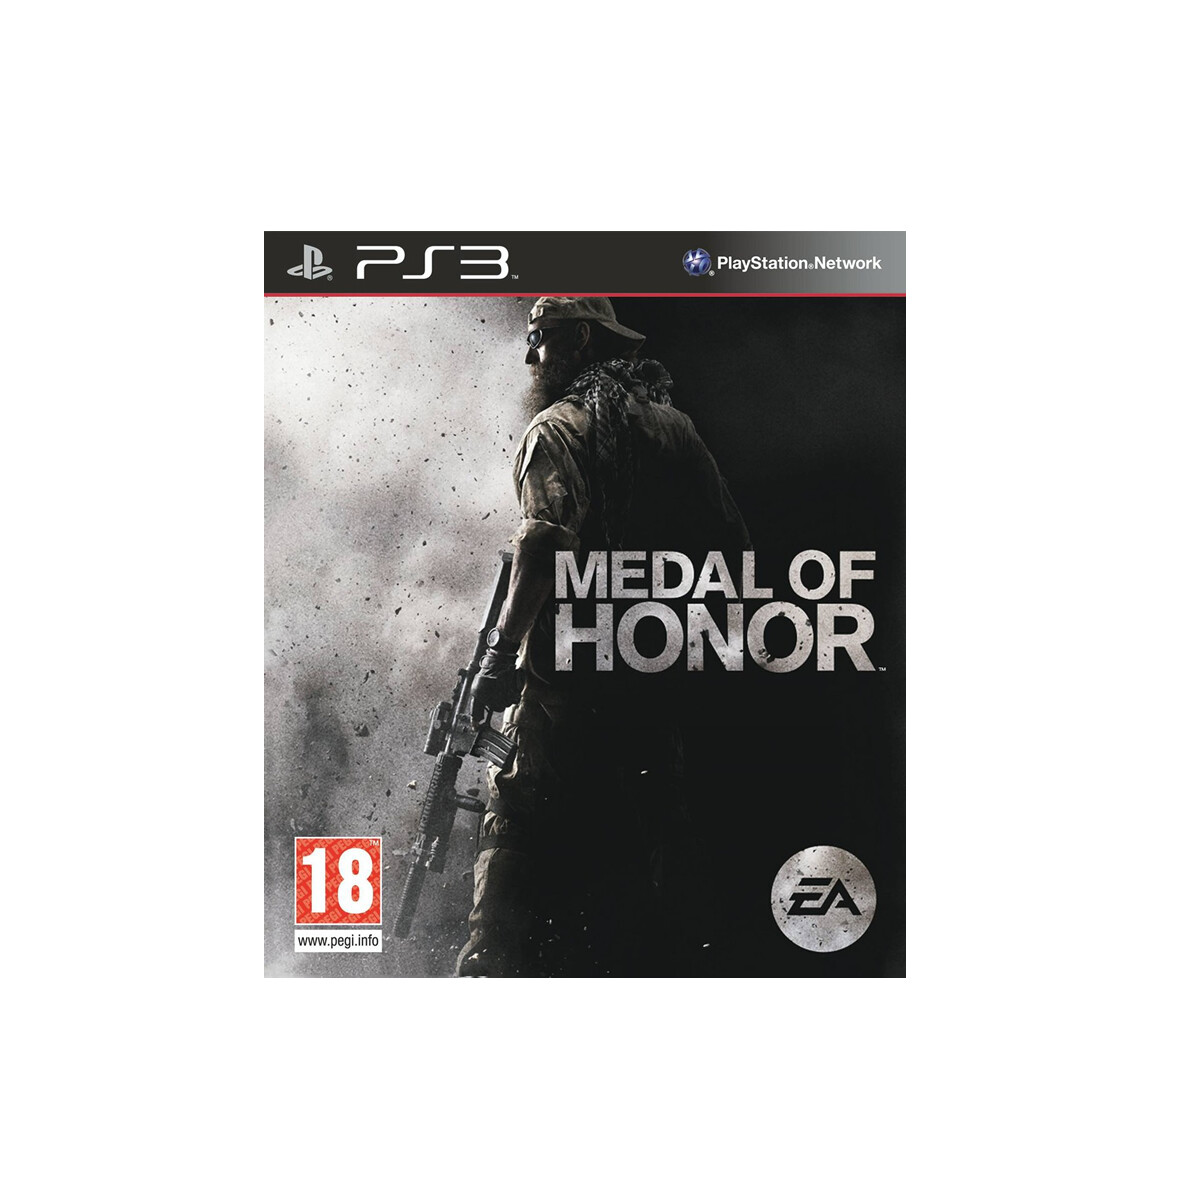 PS3 MEDAL OF HONOR L.E. 